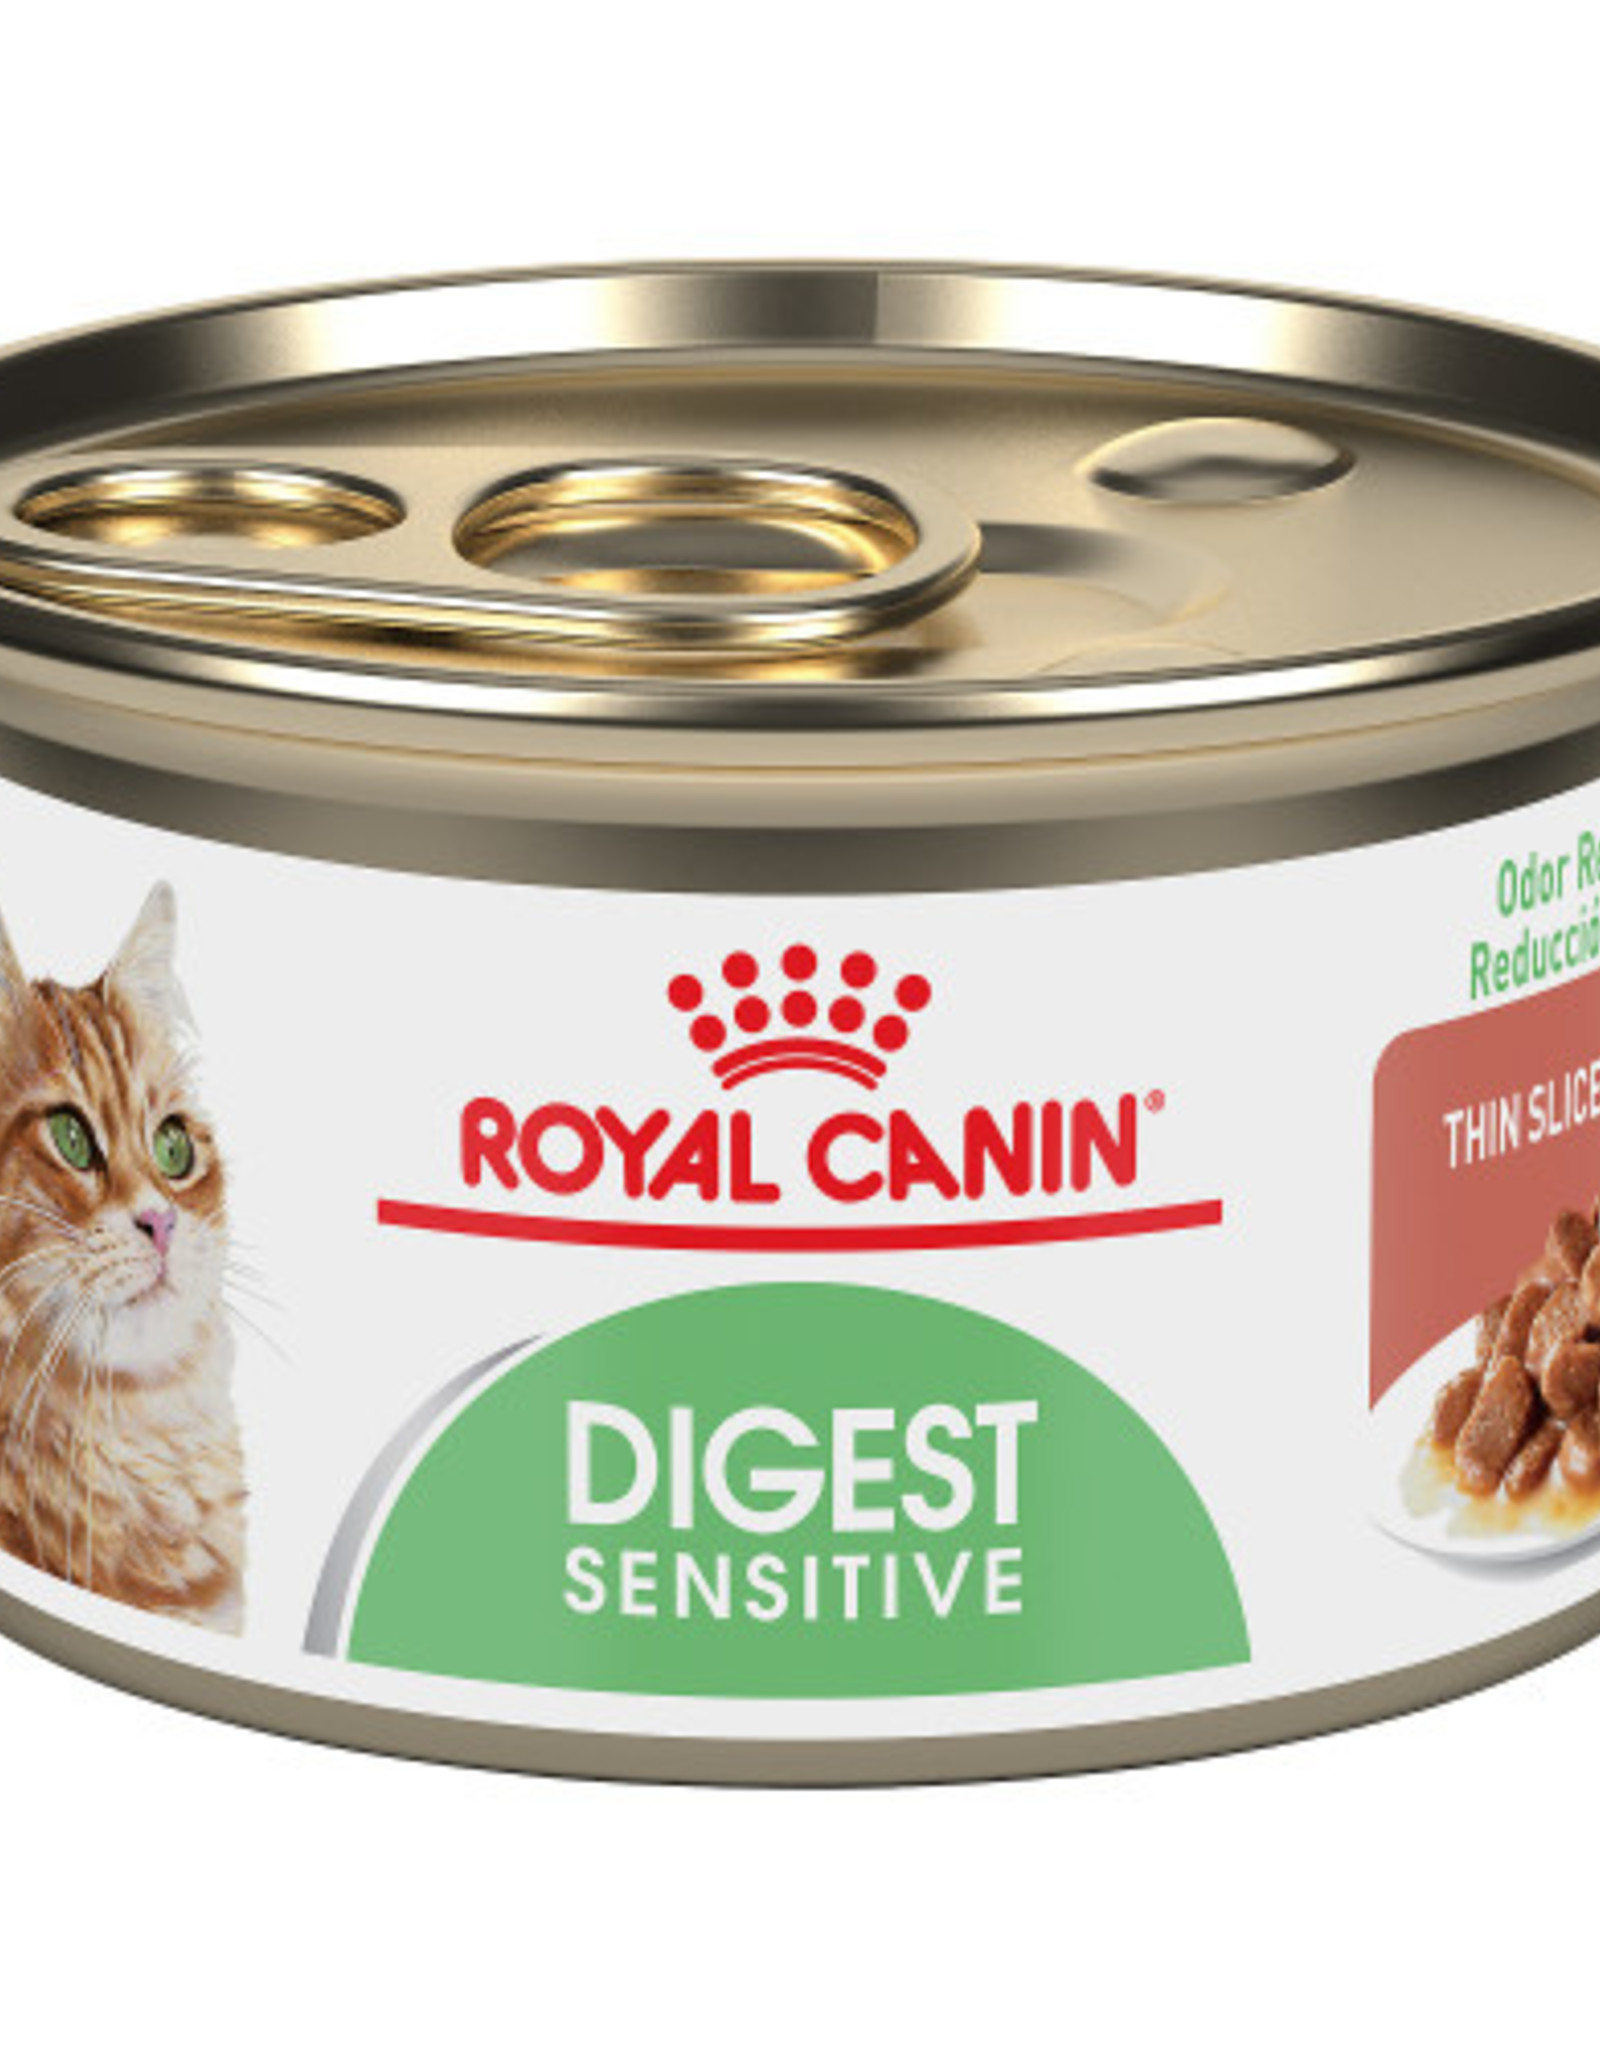 ROYAL CANIN ROYAL CANIN CAT CAN ADULT SENSITIVE DIGEST 3OZ CASE OF 24